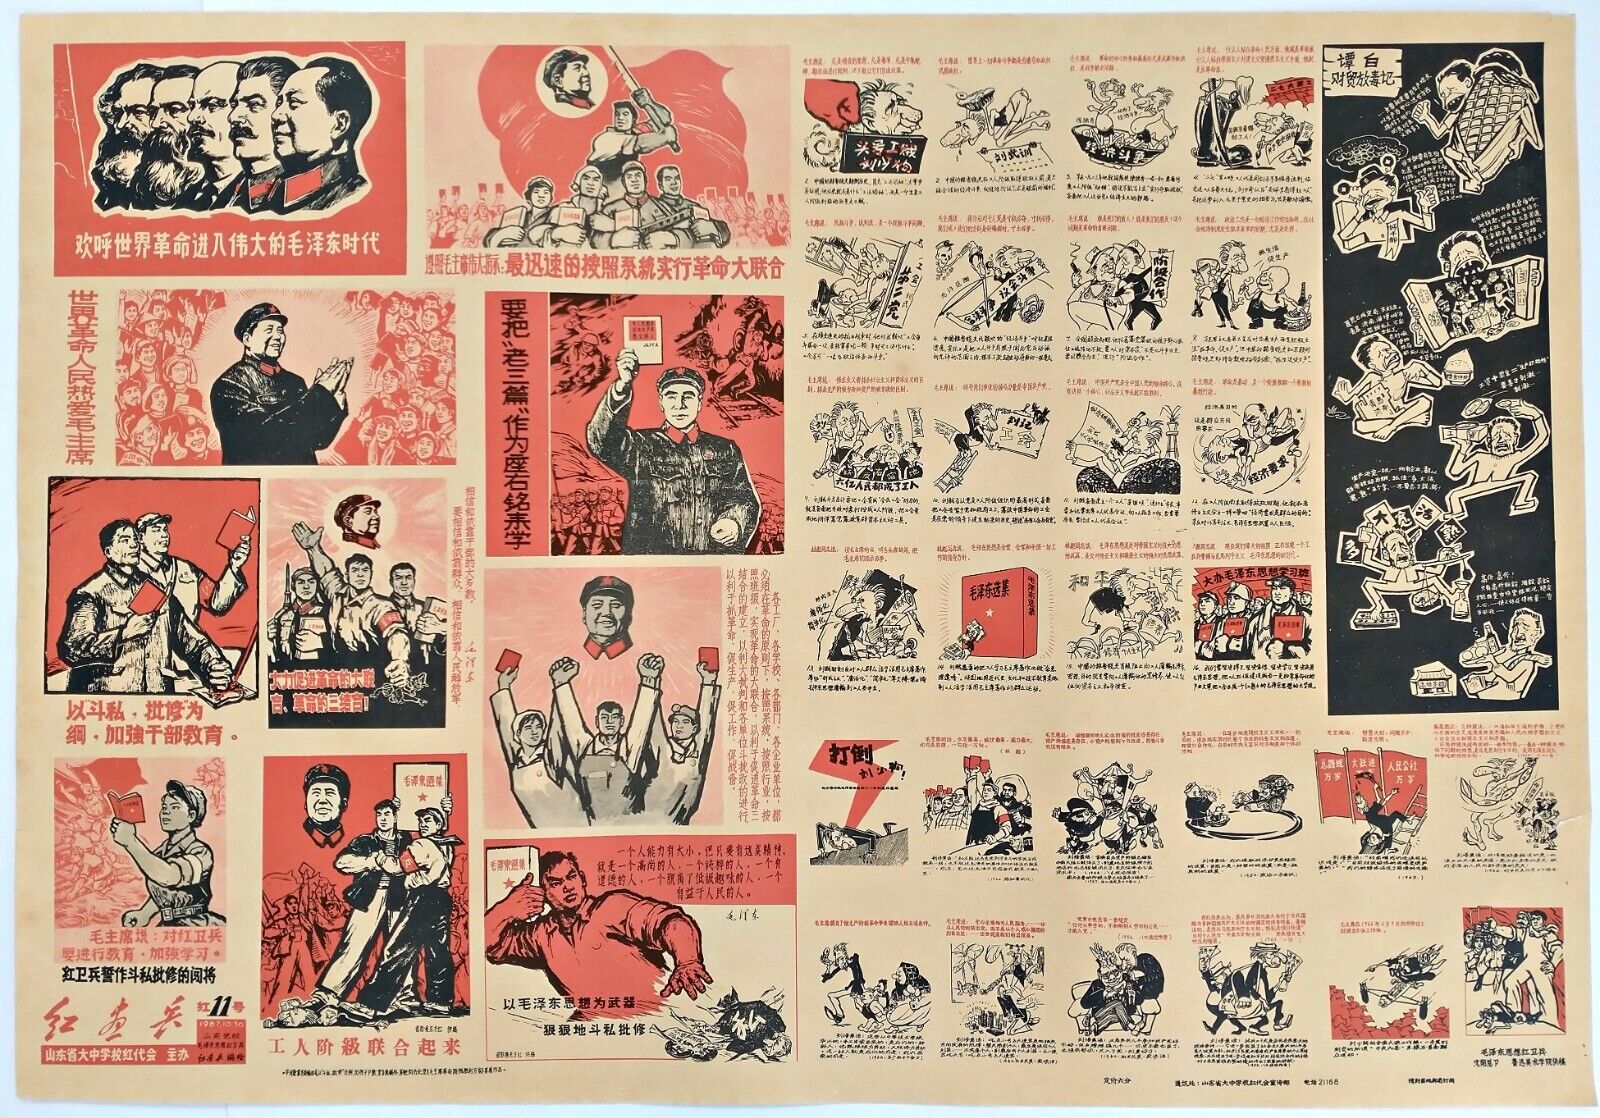 CHINESE CULTURAL REVOLUTION POSTER 60's VINTAGE - US SELLER - POSTER COLLAGE